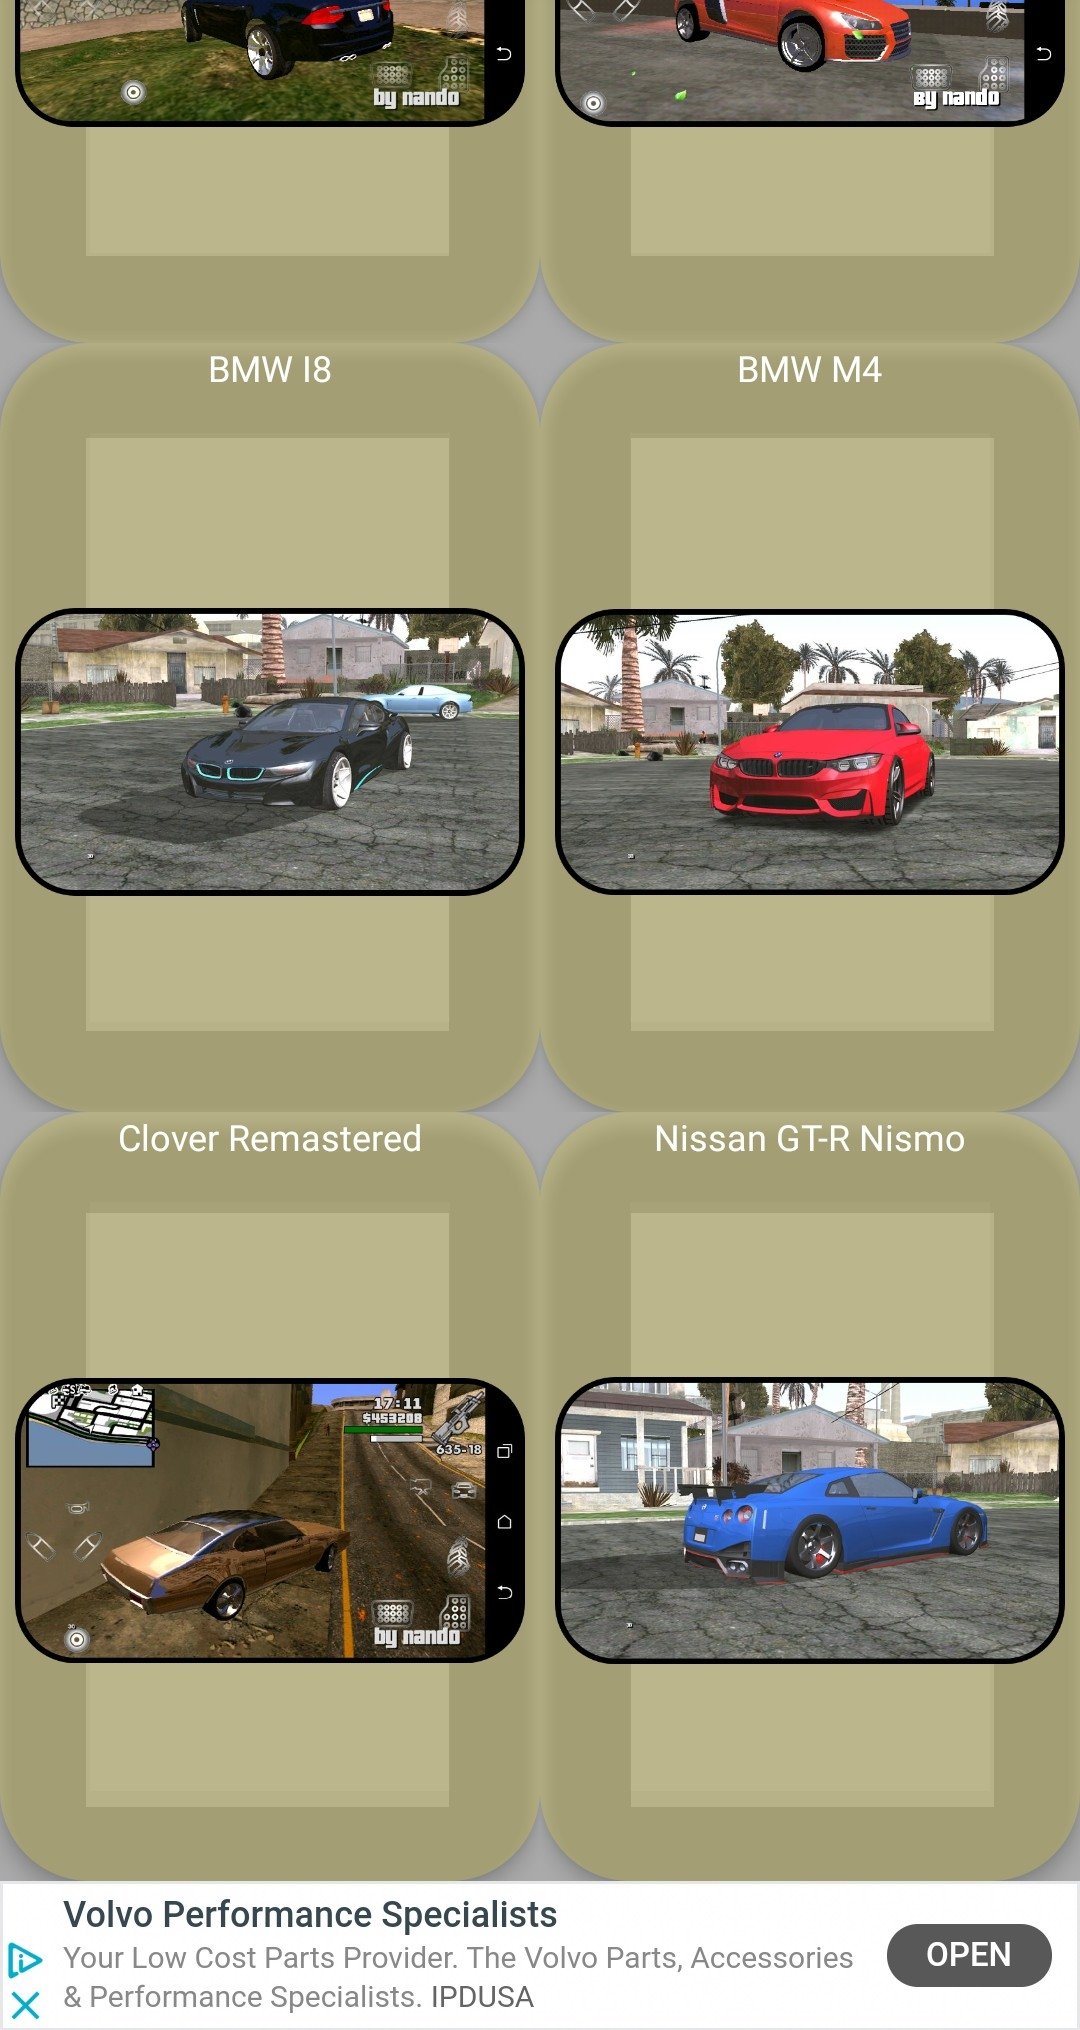 CLEO SA for Android Free Download